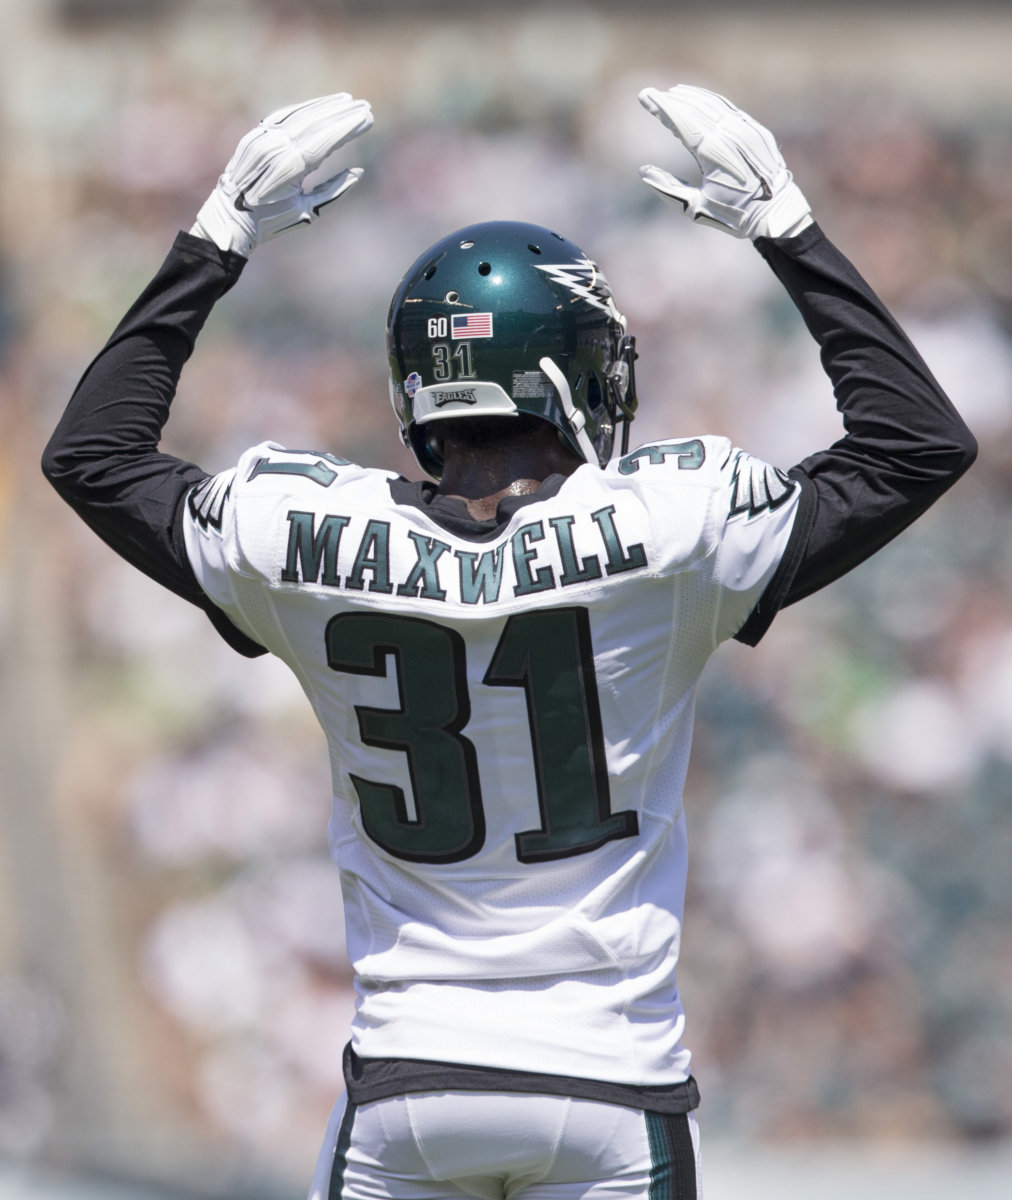 Latest Eagles rumors, news: Byron Maxwell to Dolphins, still open to drafting